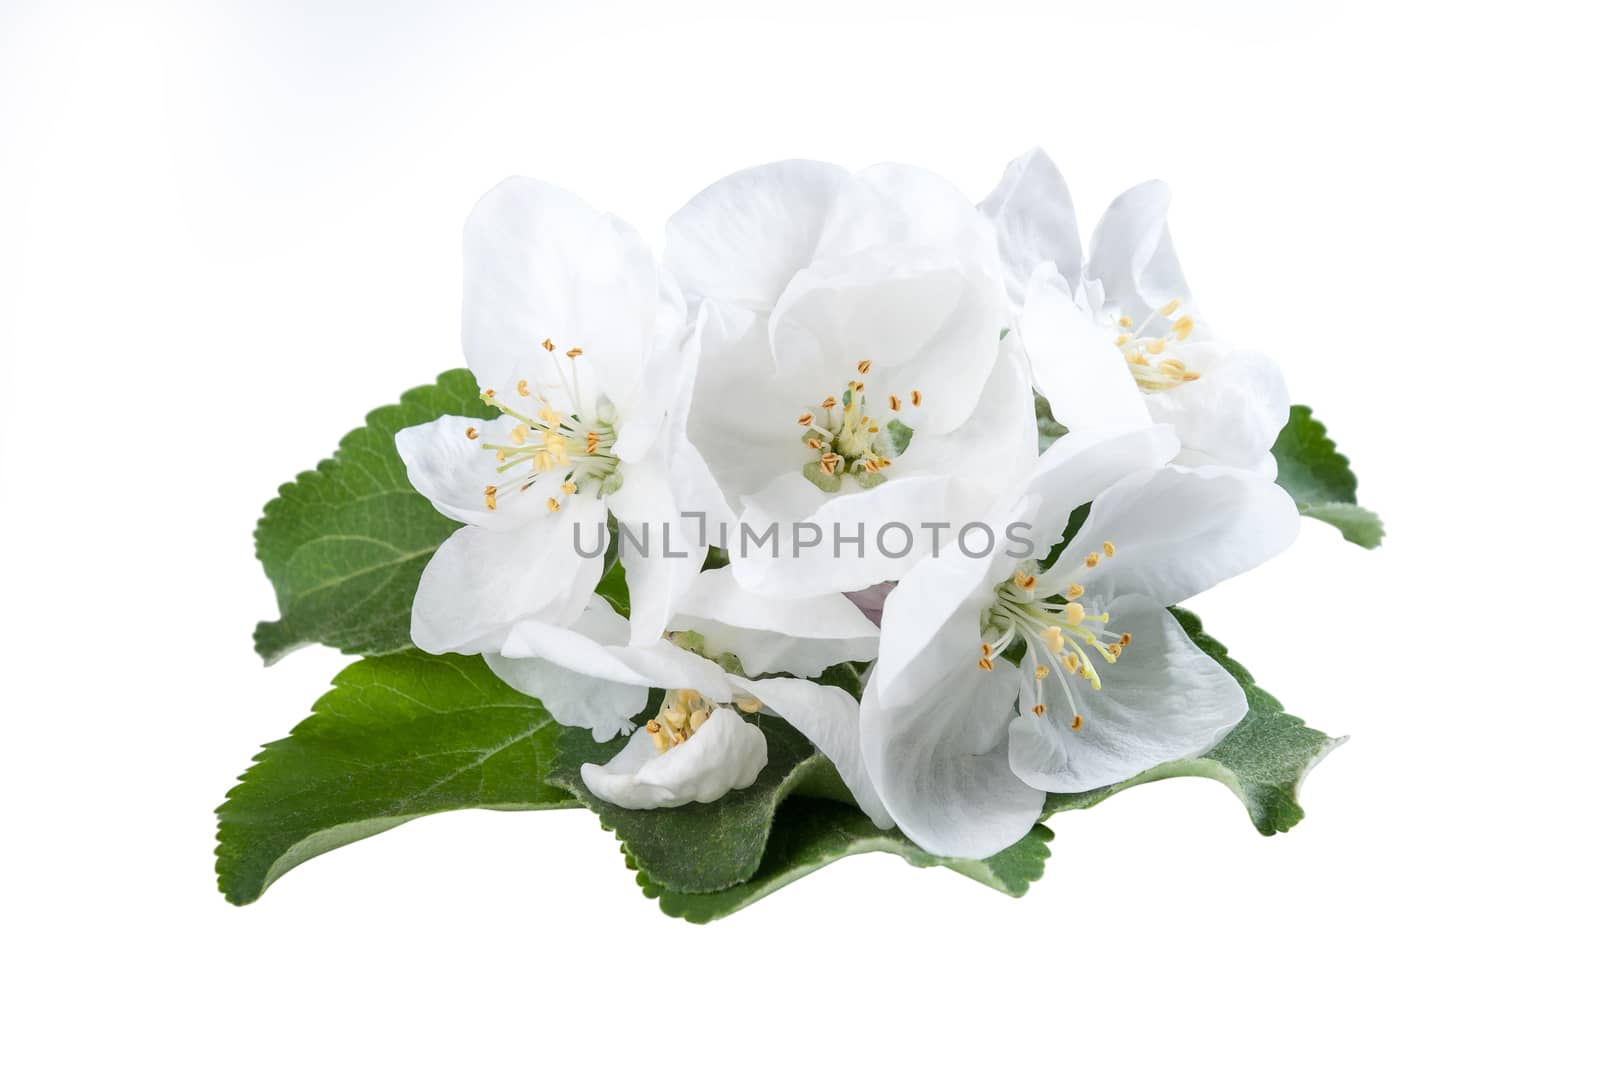 Apples flower with green leaves isolated on a white background